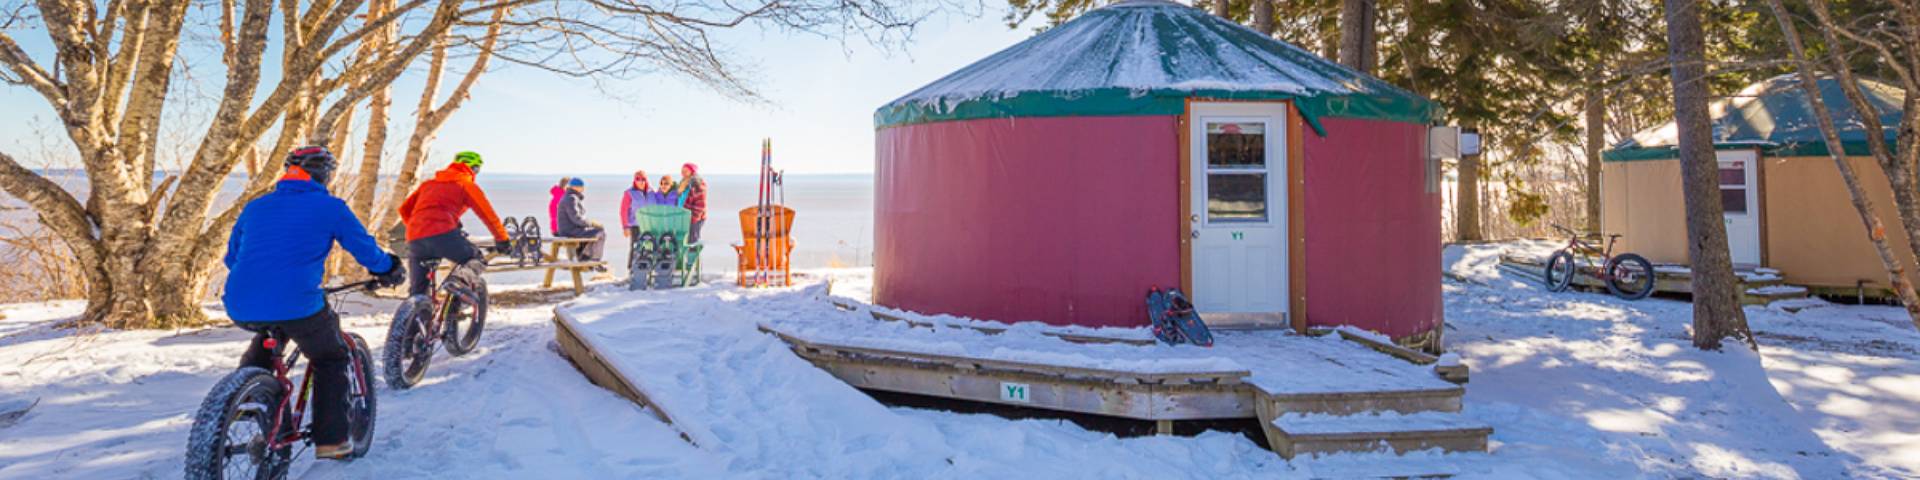 Outside view of a Yurt in the winter